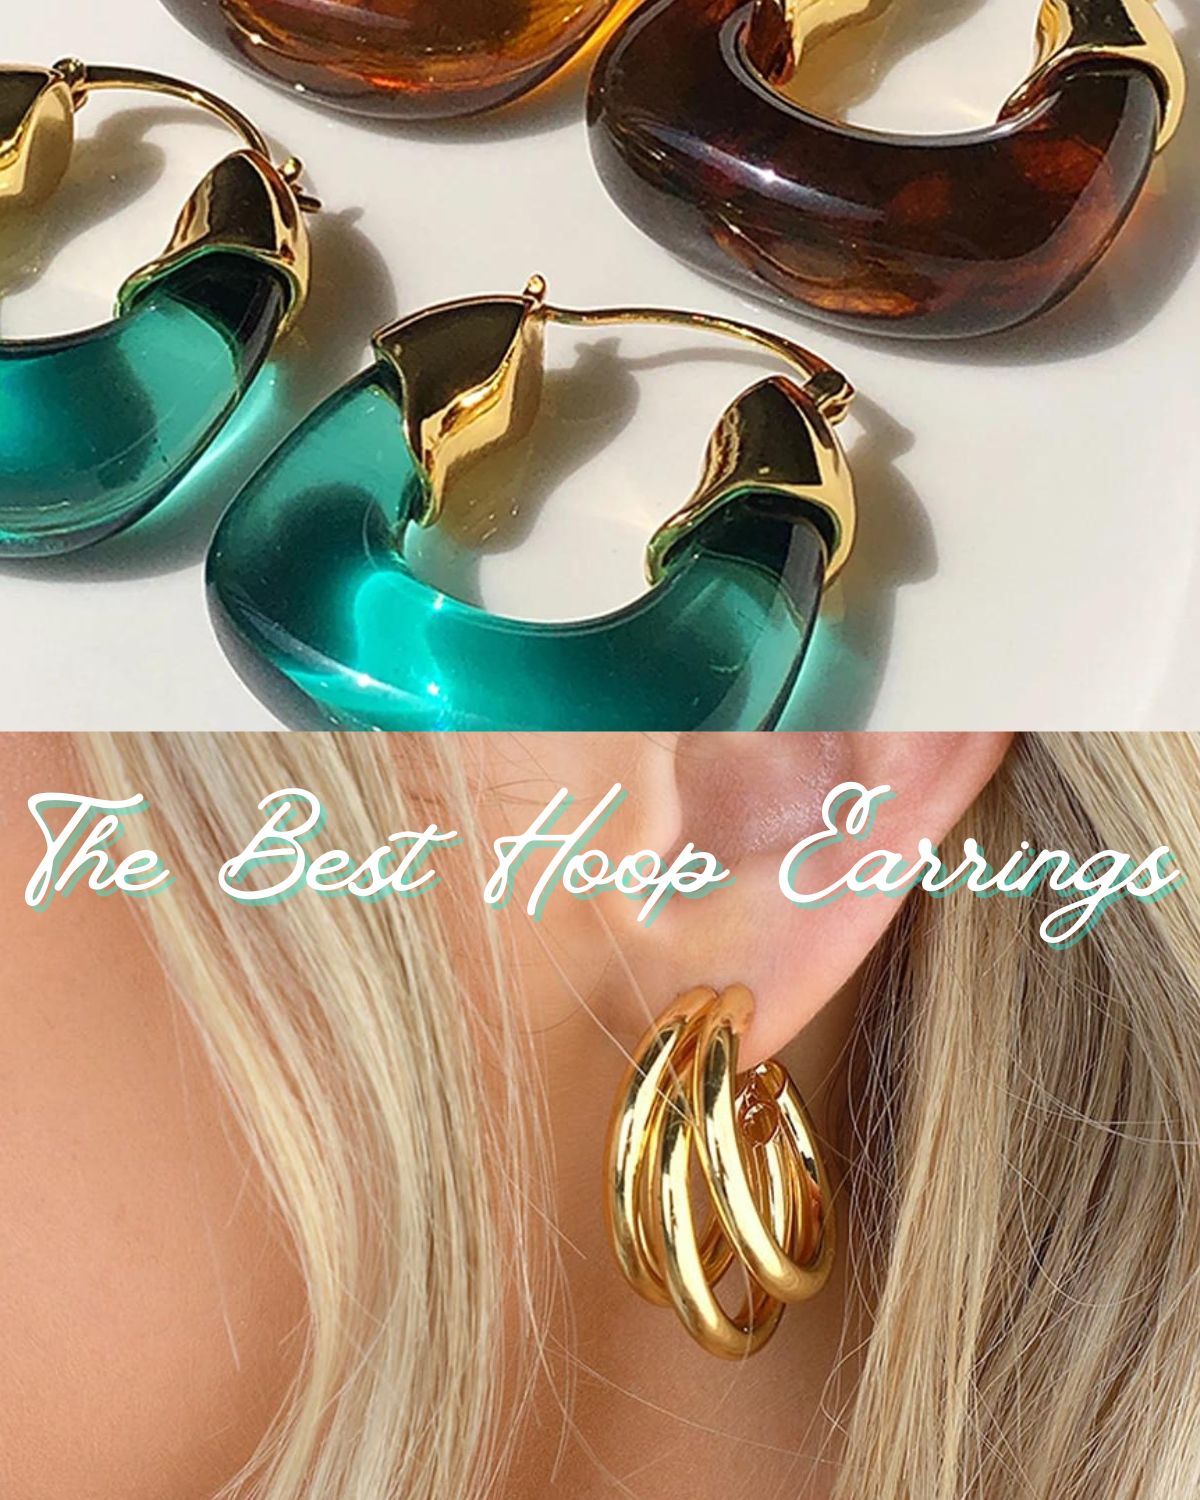 Two different styles of earrings: minimalist gold and resin